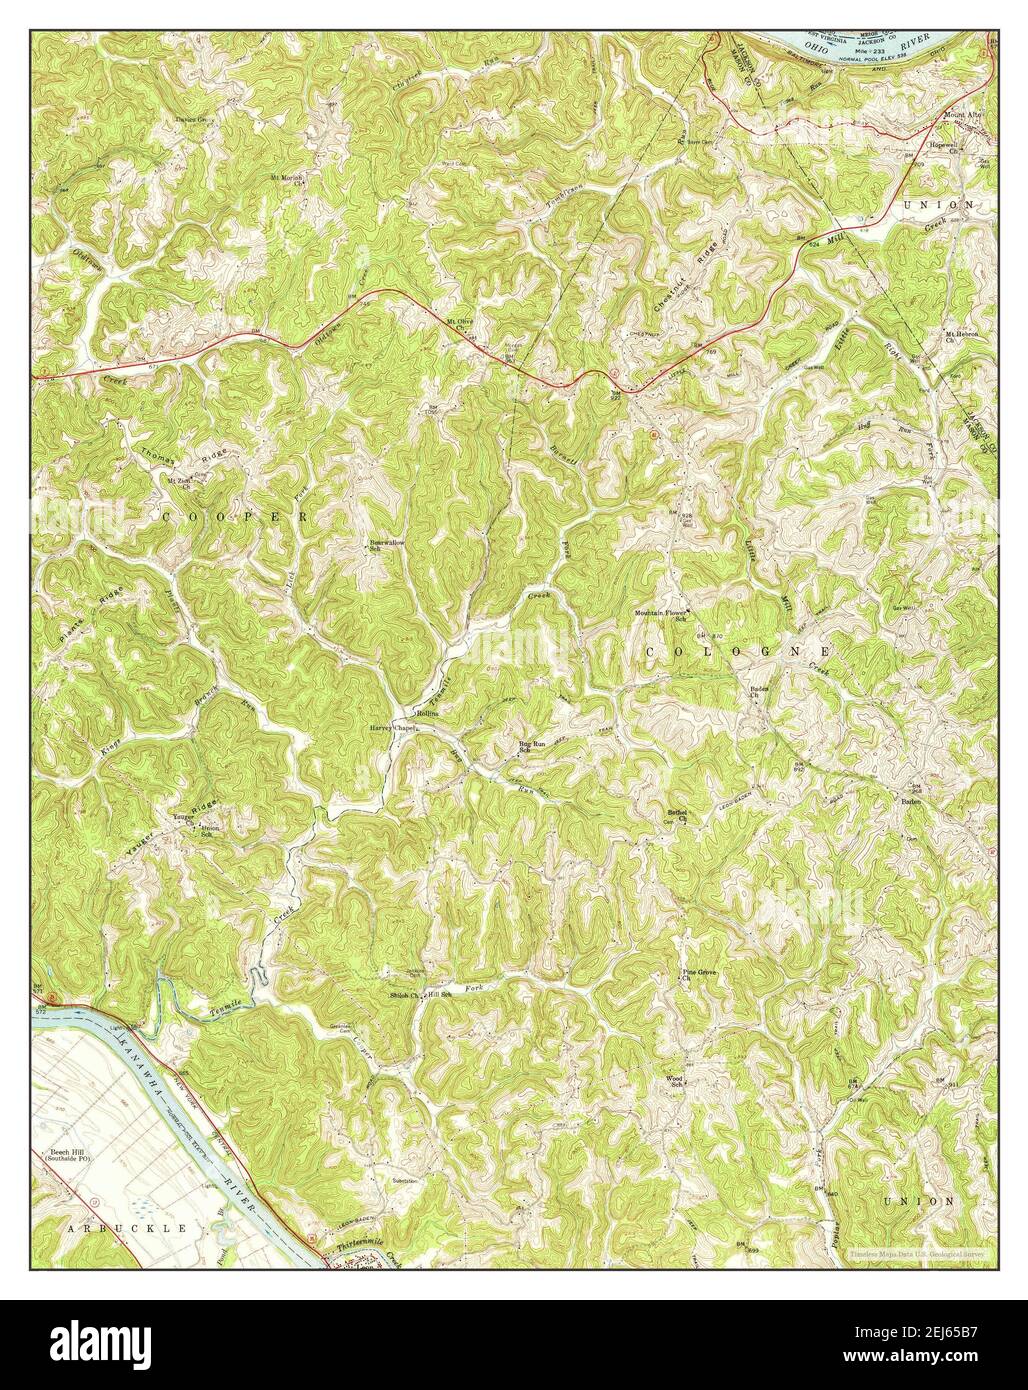 Mount Alto, West Virginia, map 1958, 1:24000, United States of America by Timeless Maps, data U.S. Geological Survey Stock Photo